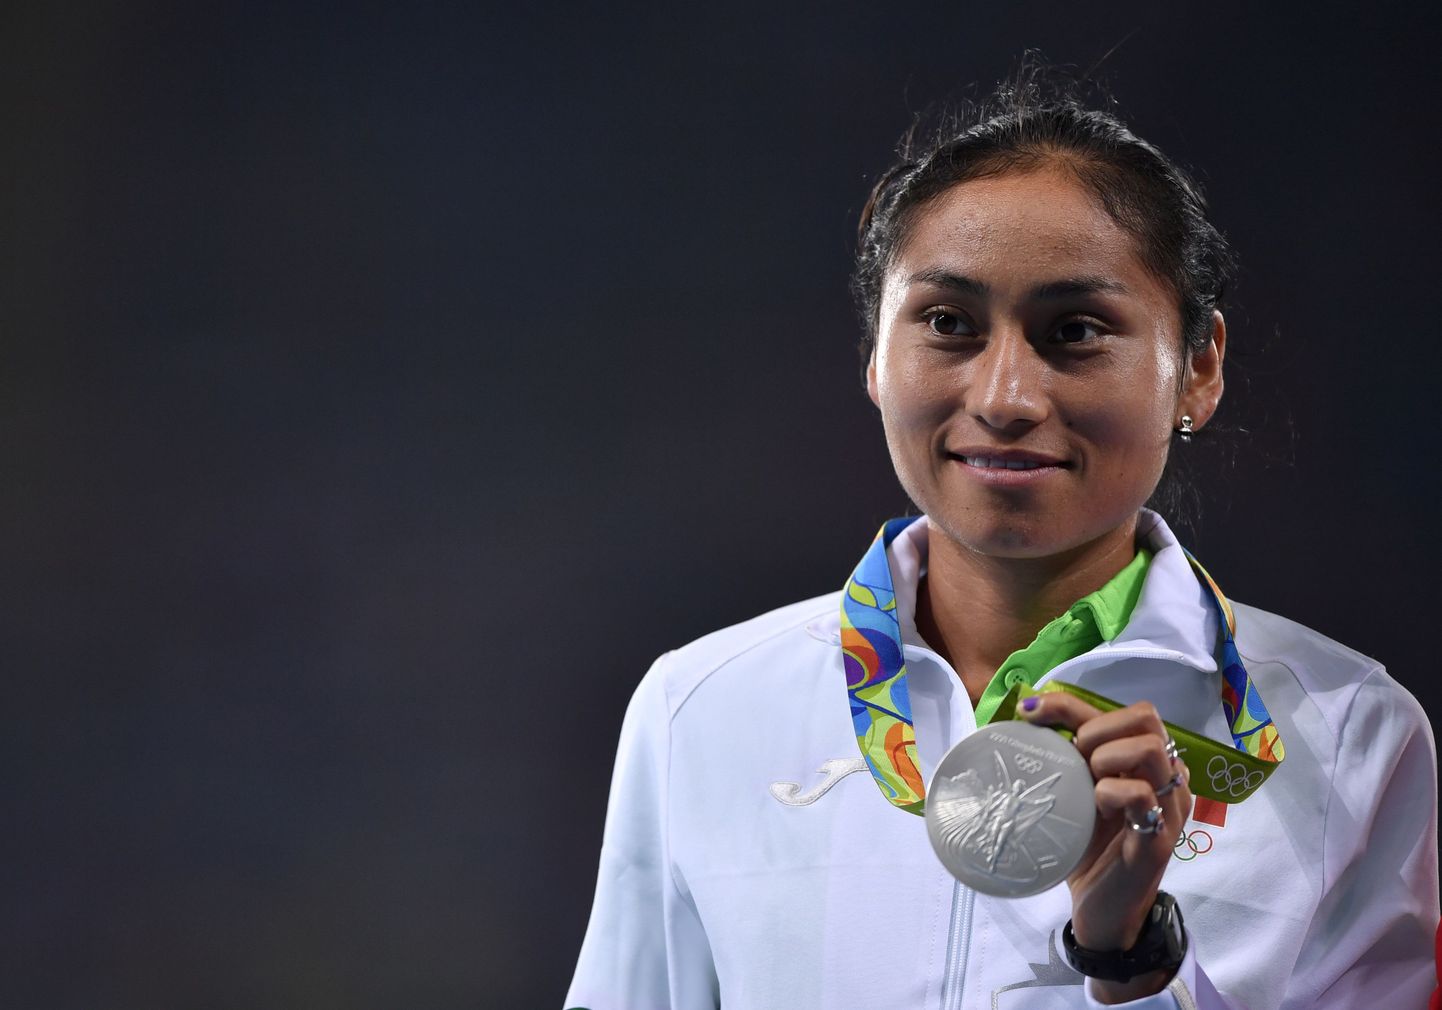 (LtoR) Mexico's Maria Guadalupe Gonzalez (silver medal) poses during the podium ceremony for the Women's 20km Race Walk during the athletics event at the Rio 2016 Olympic stadium in Rio de Janeiro on August 19, 2016.   / AFP PHOTO / Fabrice COFFRINI